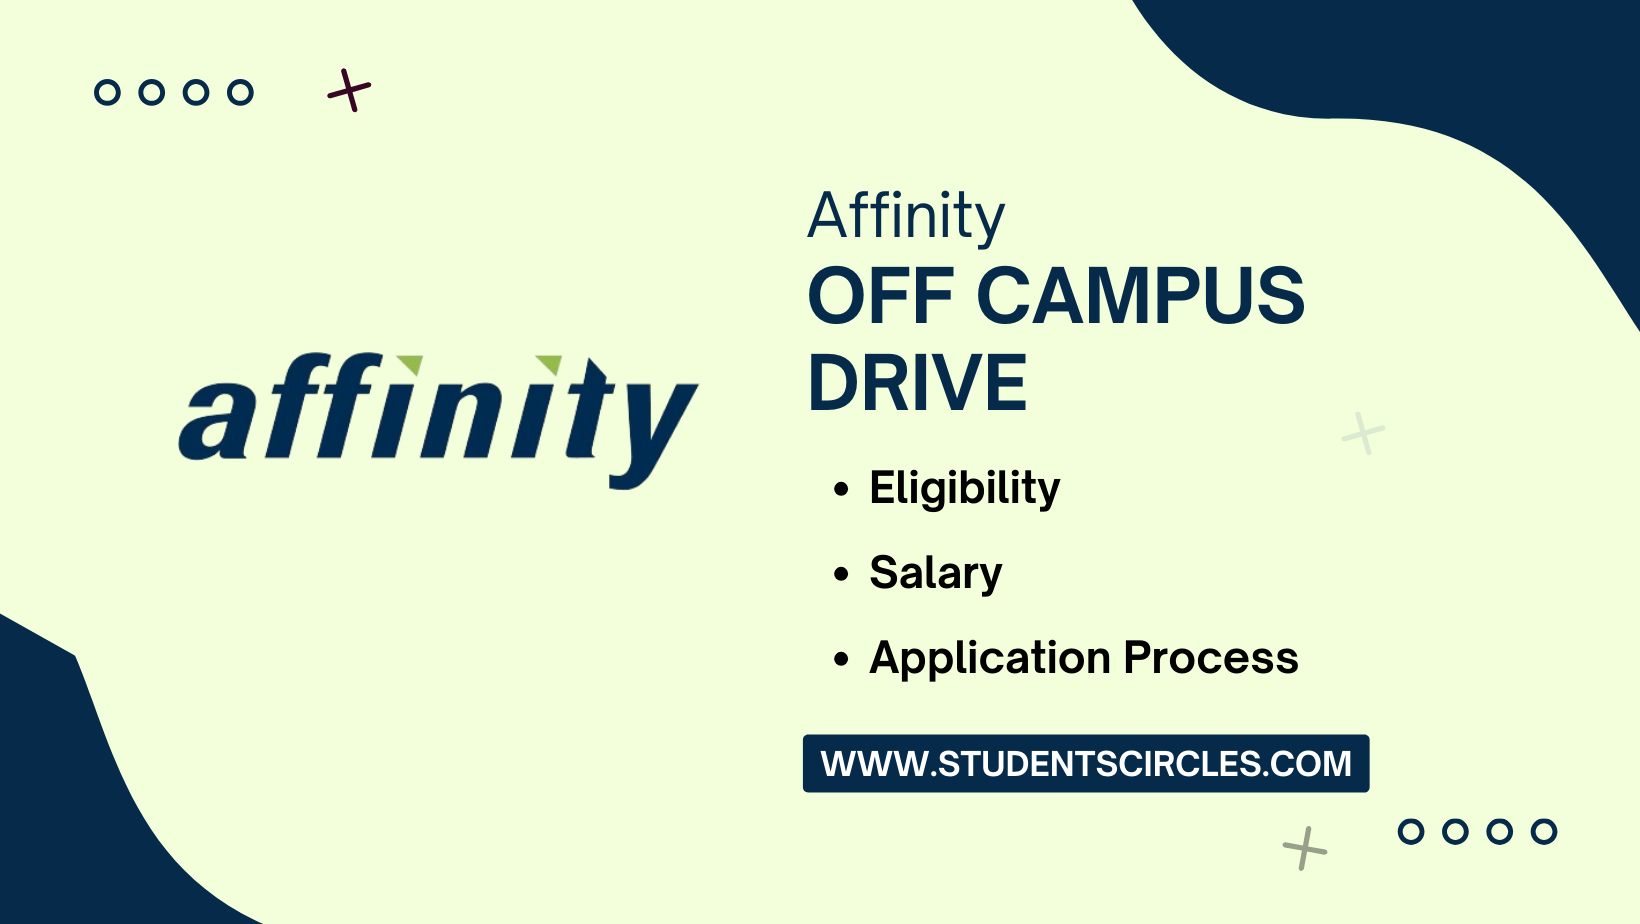 Affinity Off Campus Drive